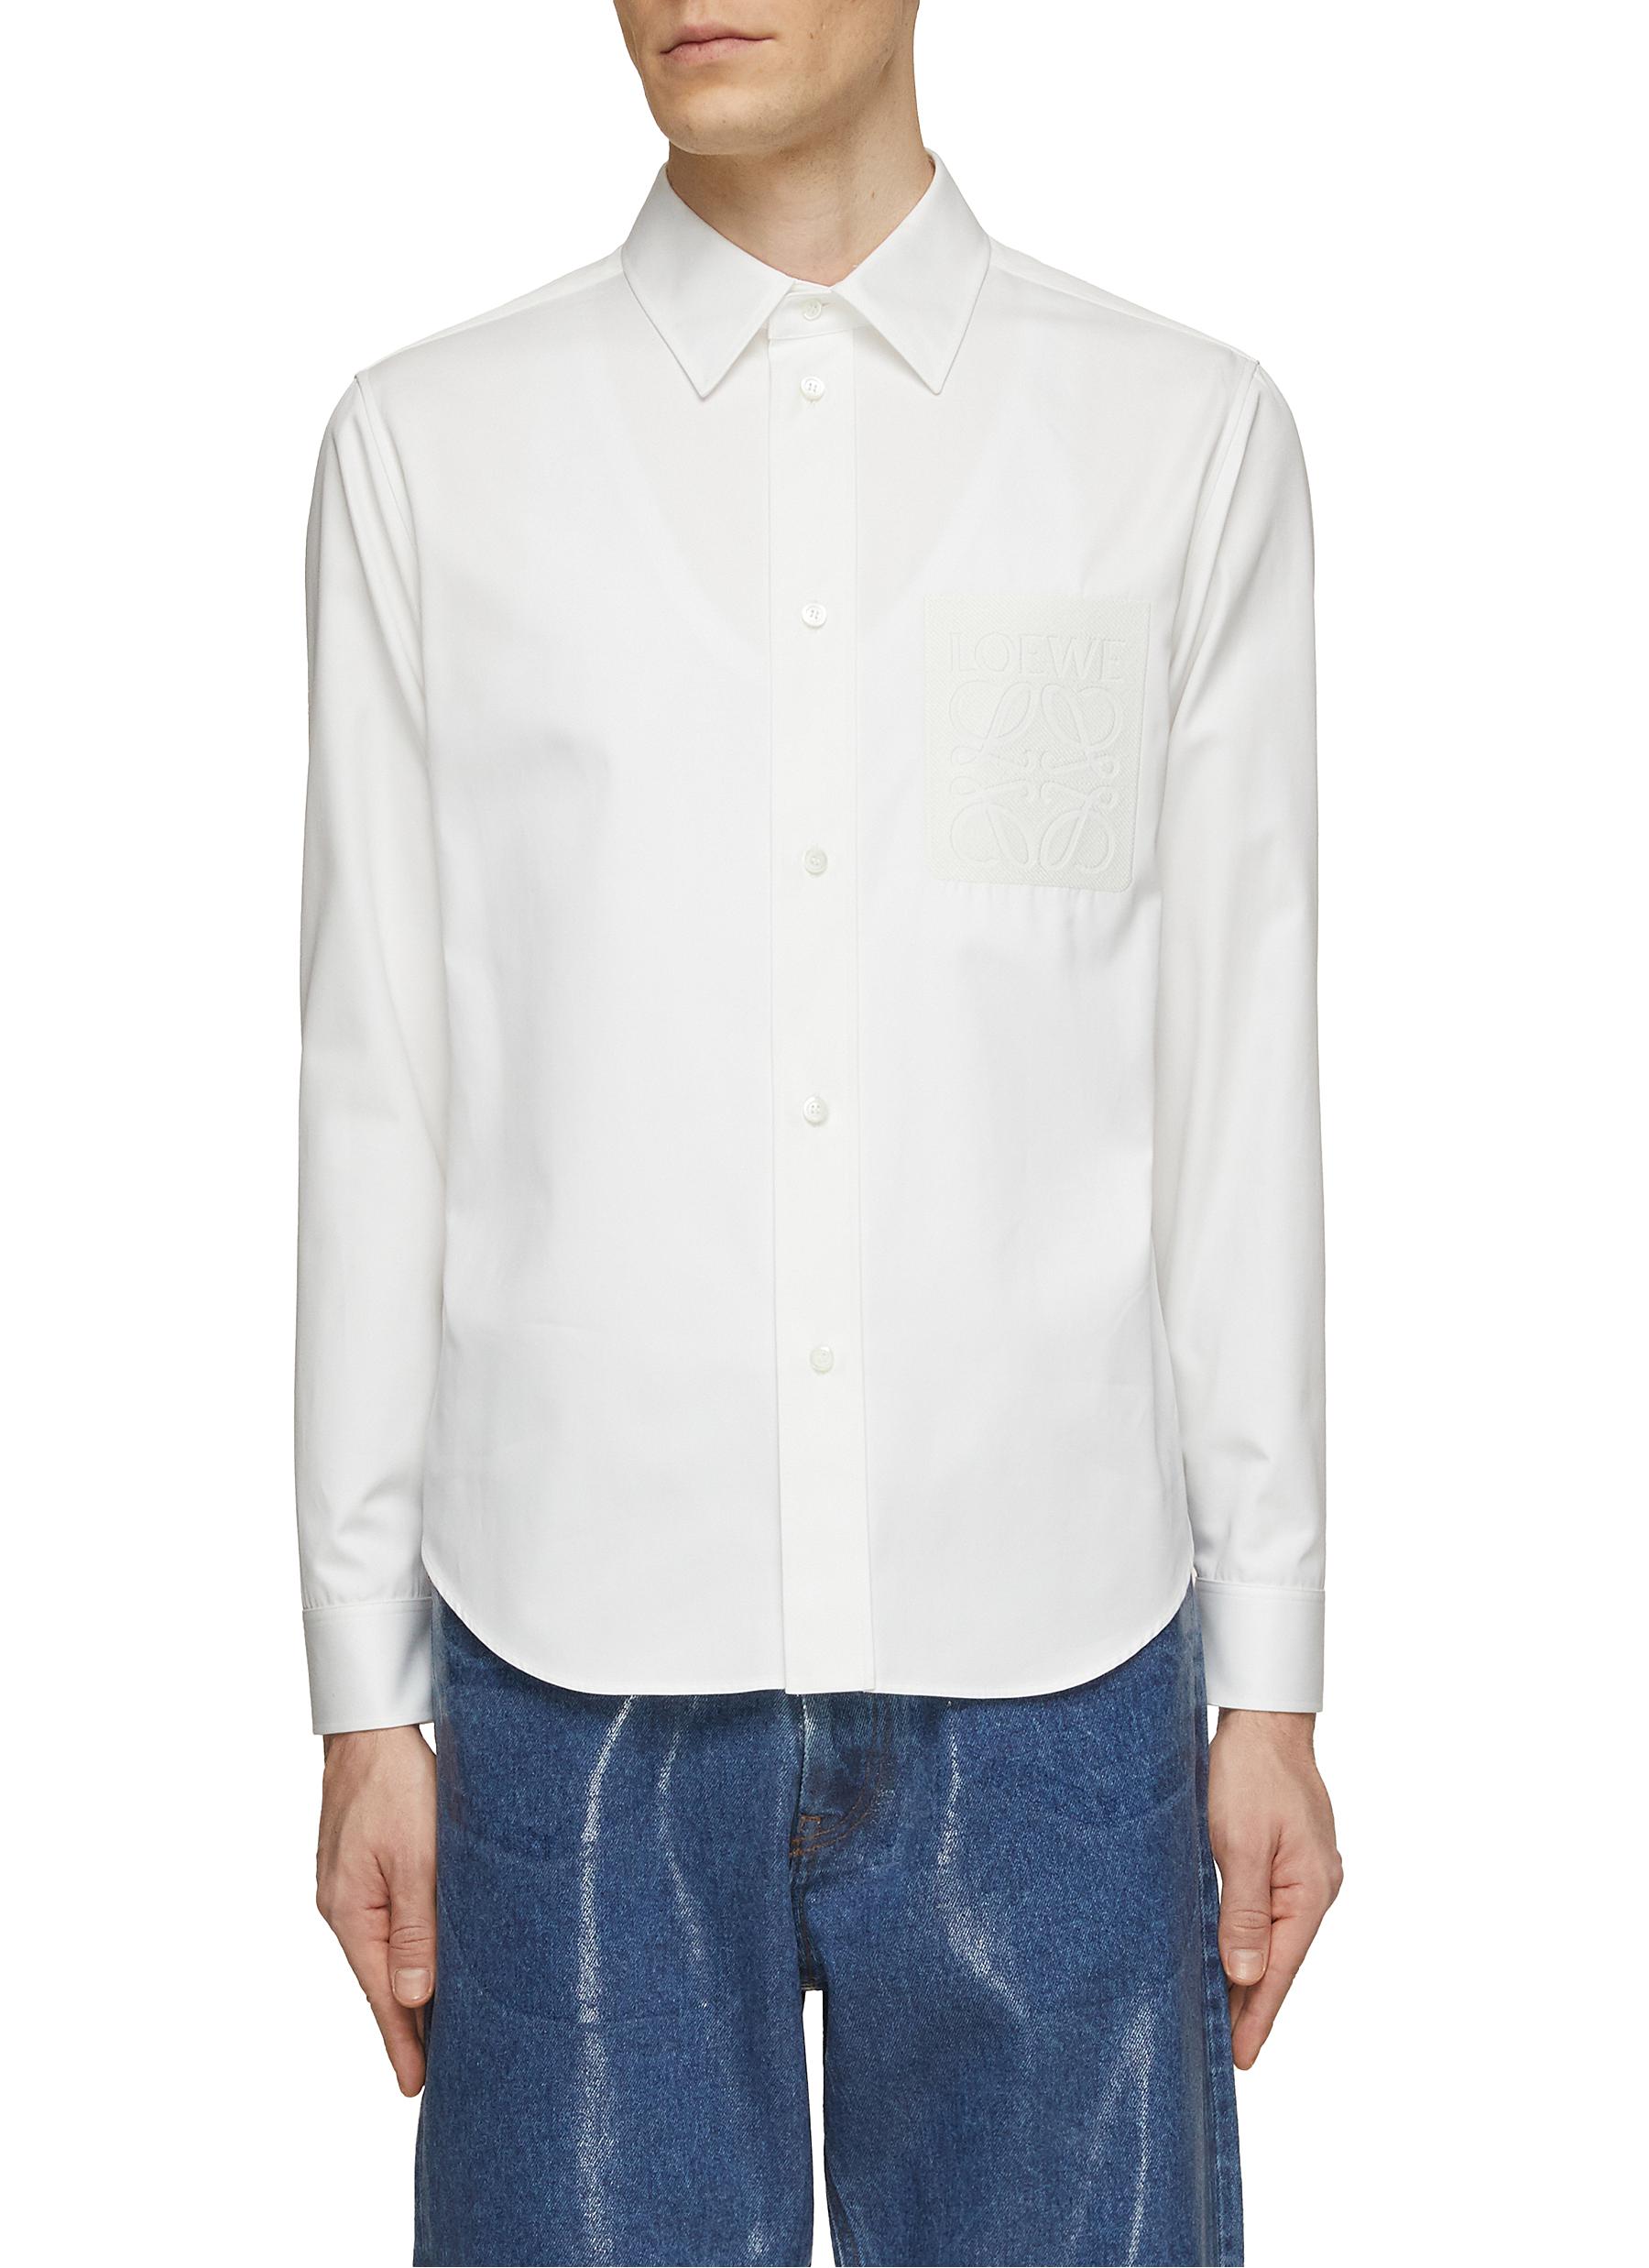 Negative Space Embroidered Angram Shirt